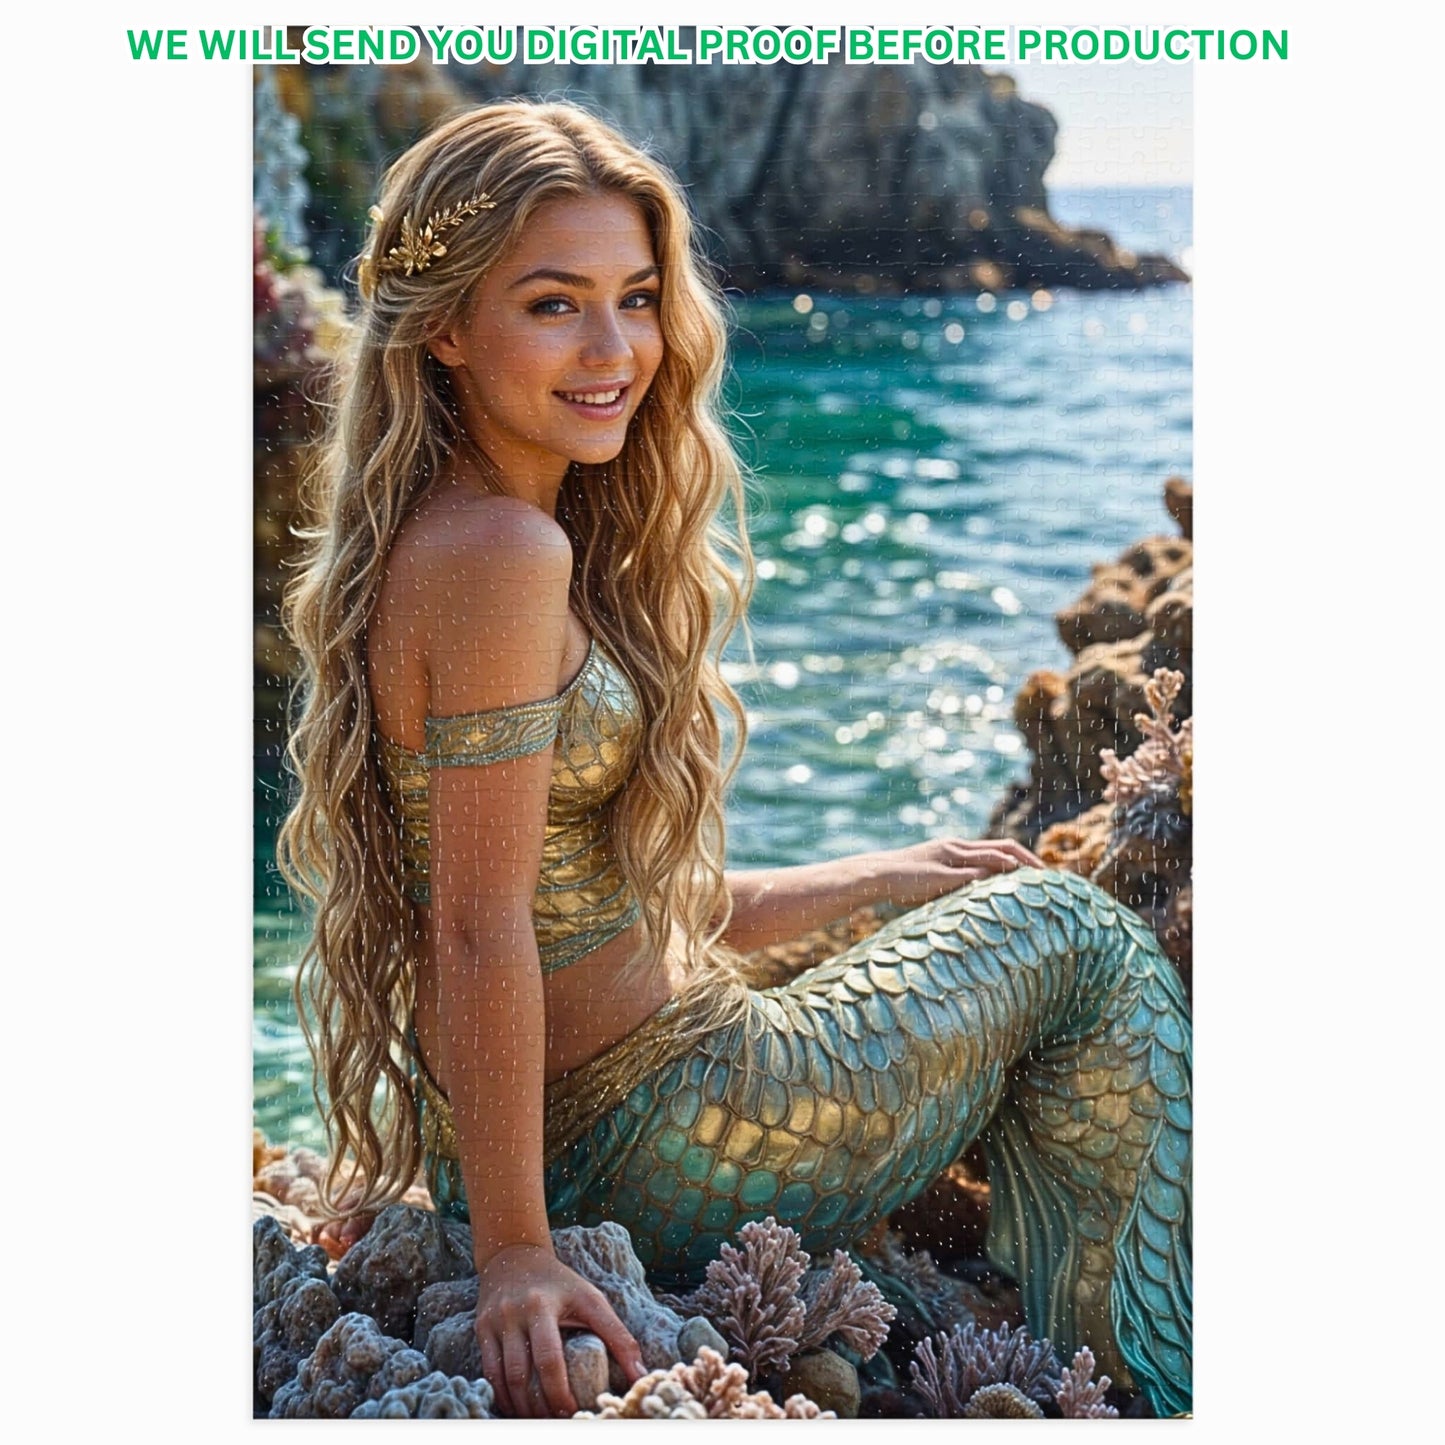 Create a unique custom mermaid puzzle from your favorite photo! Personalize your puzzle with a custom princess portrait for a one-of-a-kind mermaid gift. Choose from 250 to 1000 pieces for the perfect birthday puzzle gift. Lady mermaid gifts, princess gifts, and mermaid photo gifts available. Turn any photo into a custom mermaid art puzzle. Transform memories into personalized princess puzzles. Ideal for mermaid enthusiasts and princess fans alike. Order your custom mermaid puzzle today!